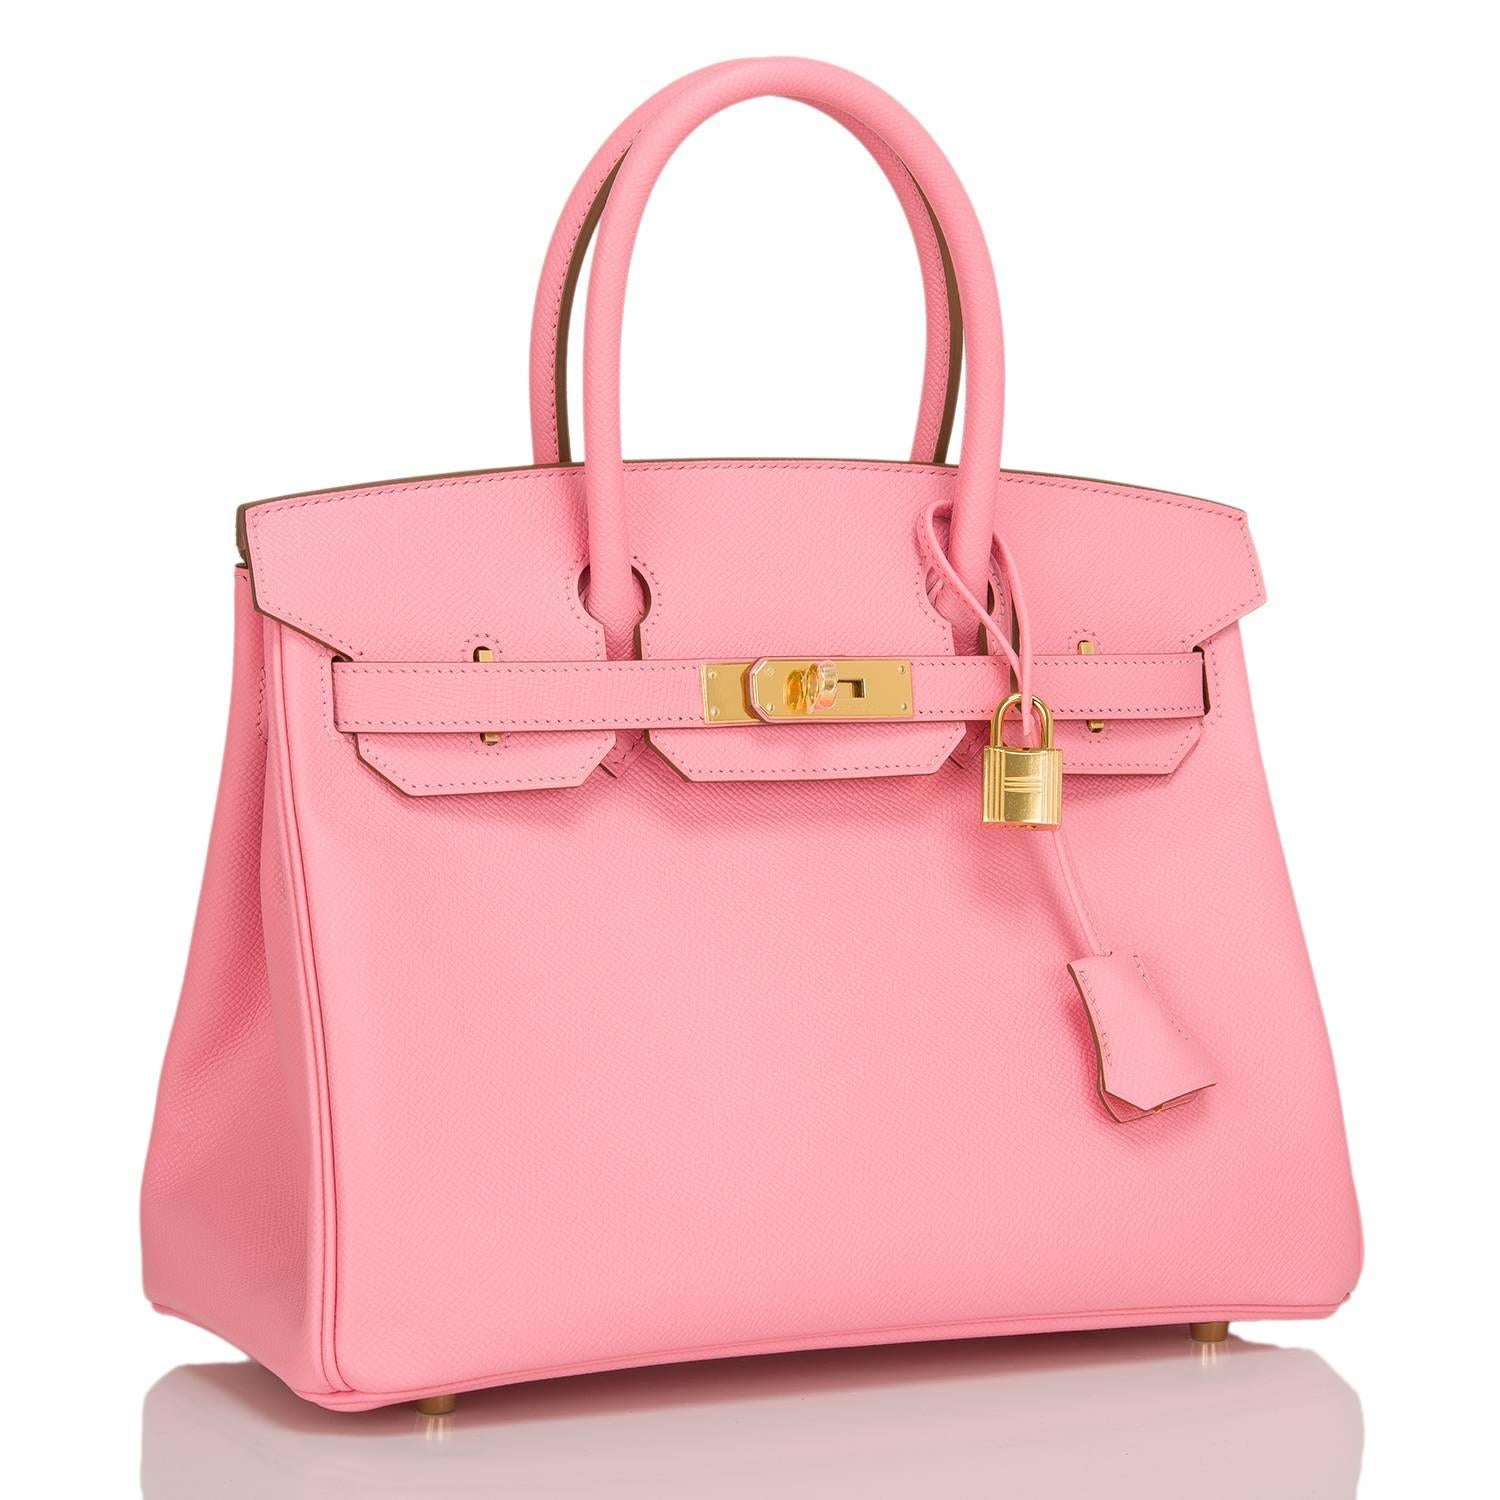 Hermes Rose Confetti 30cm in epsom leather with gold hardware.

This Birkin features tonal stitching, front toggle closure, clochette with lock and two keys, and double rolled handles.

The interior is lined in Rose Confetti chevre with one zip